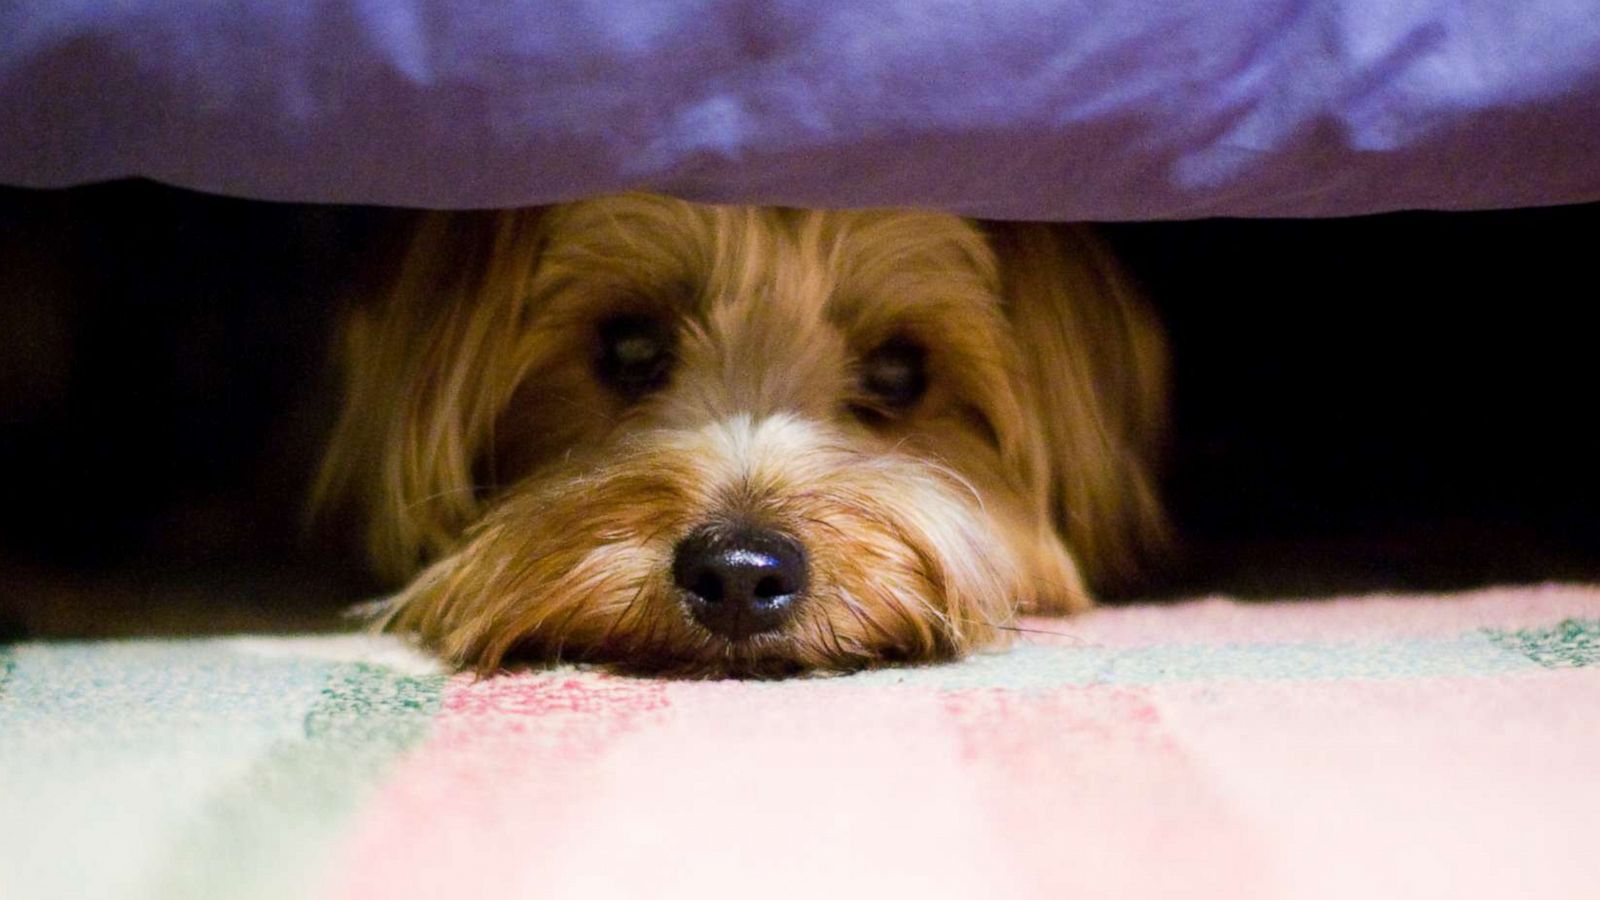 PHOTO: Scared Yorkshire terrier dog hiding under bed.